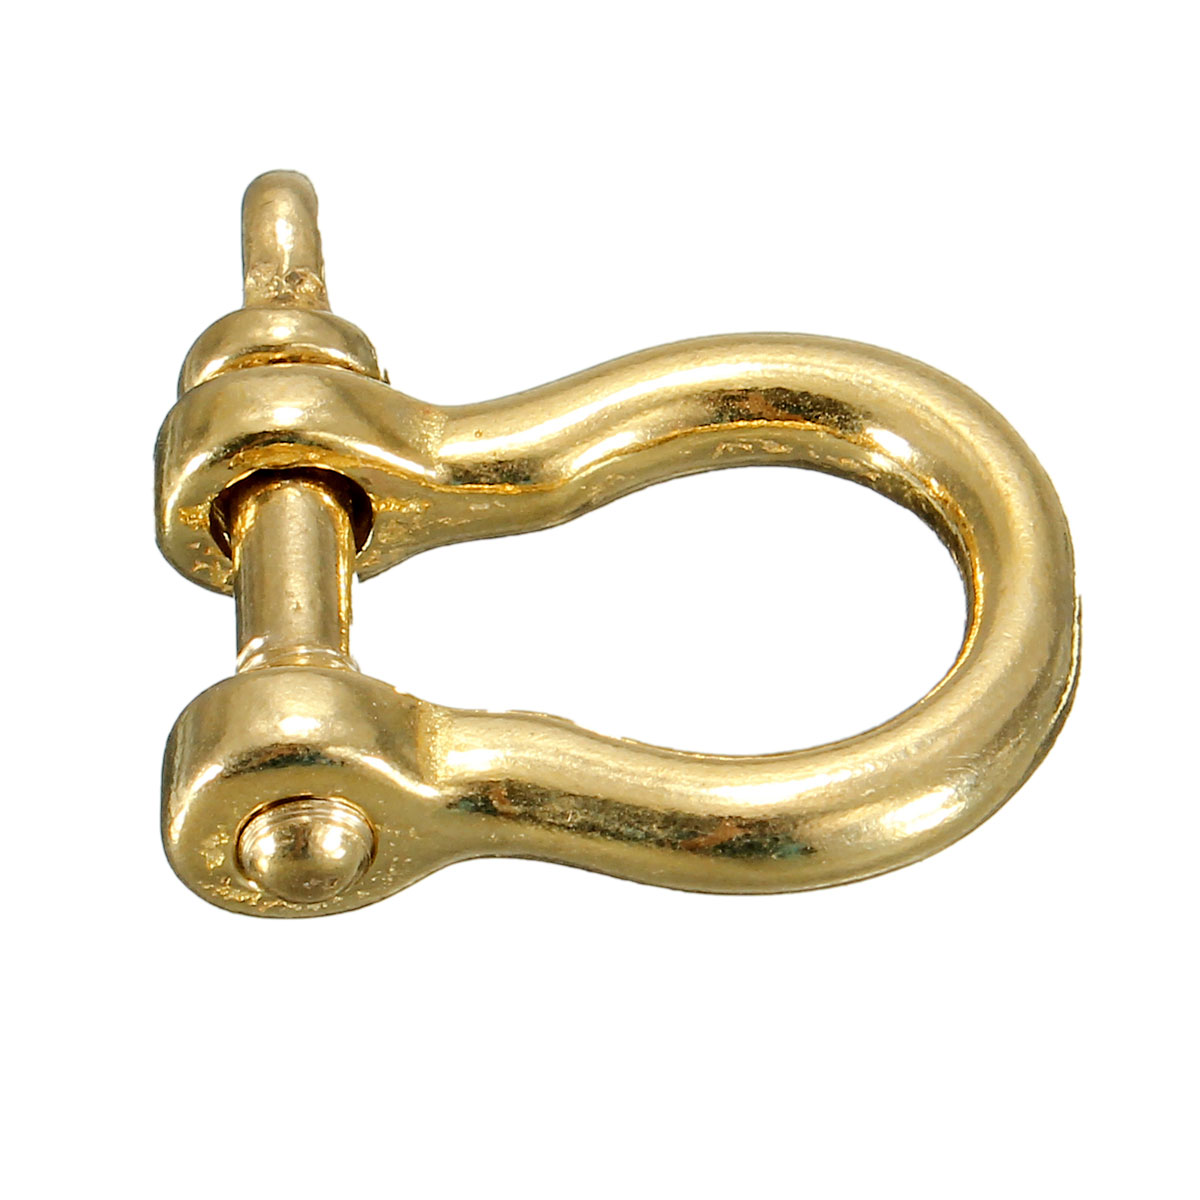 Brass-Ring-Bow-Shackle-Joint-Connect-Key-Chain-Hook-Buckle-DIY-Leather-Craft-Hardware-1256566